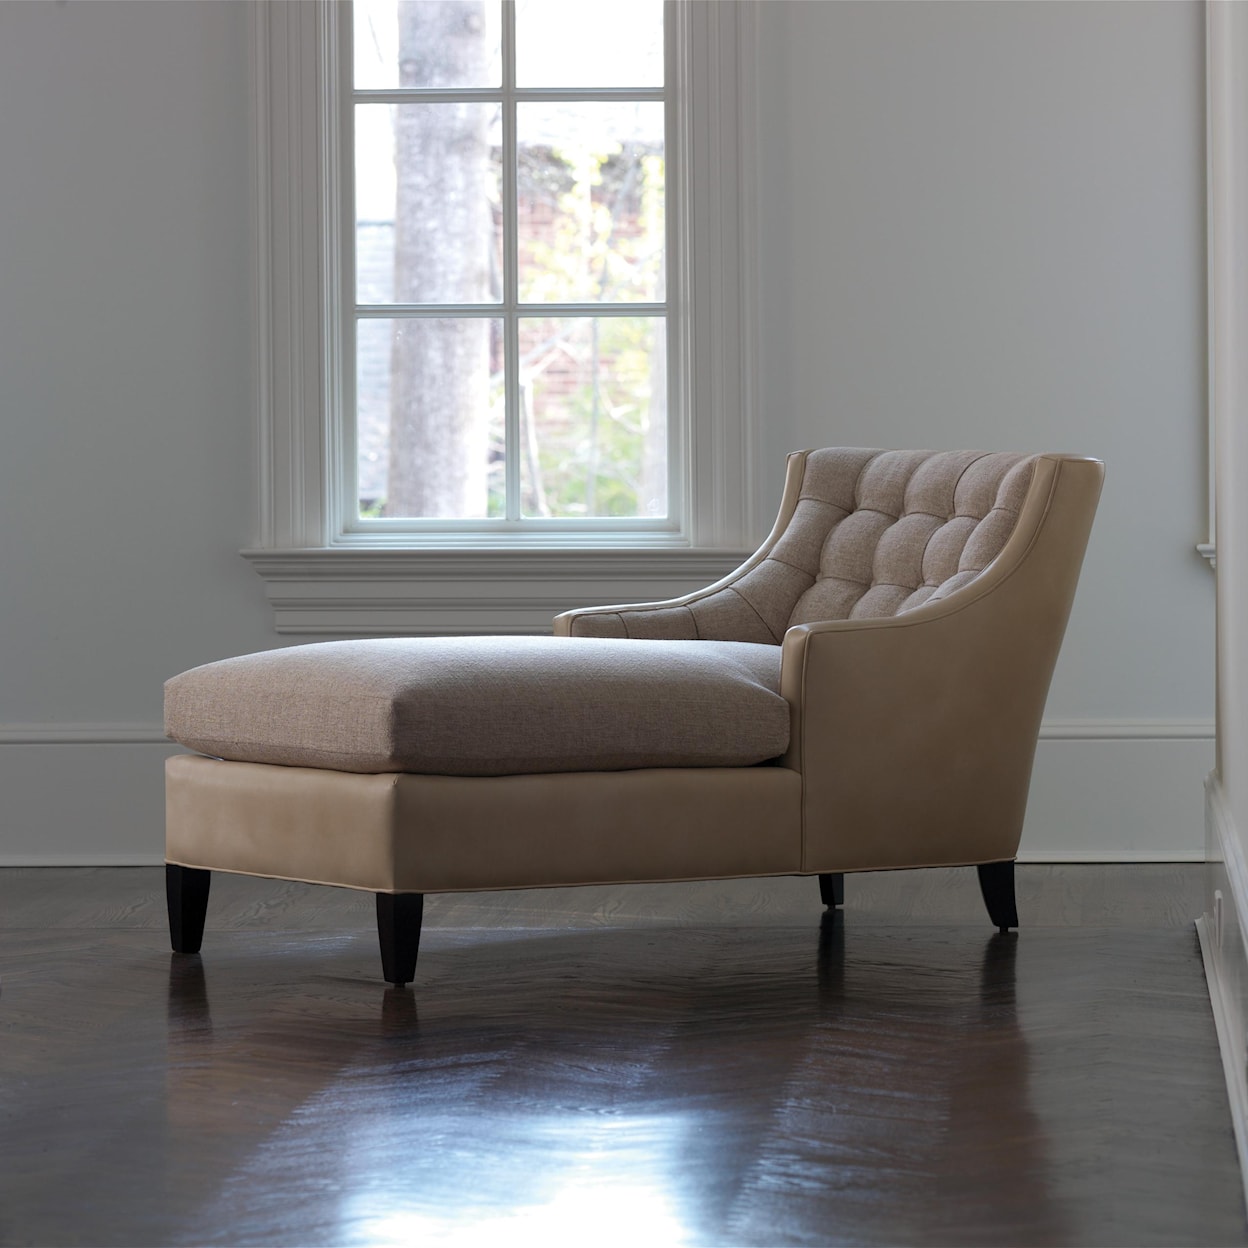 Jessica Charles Fine Upholstered Accents Deana Chaise   